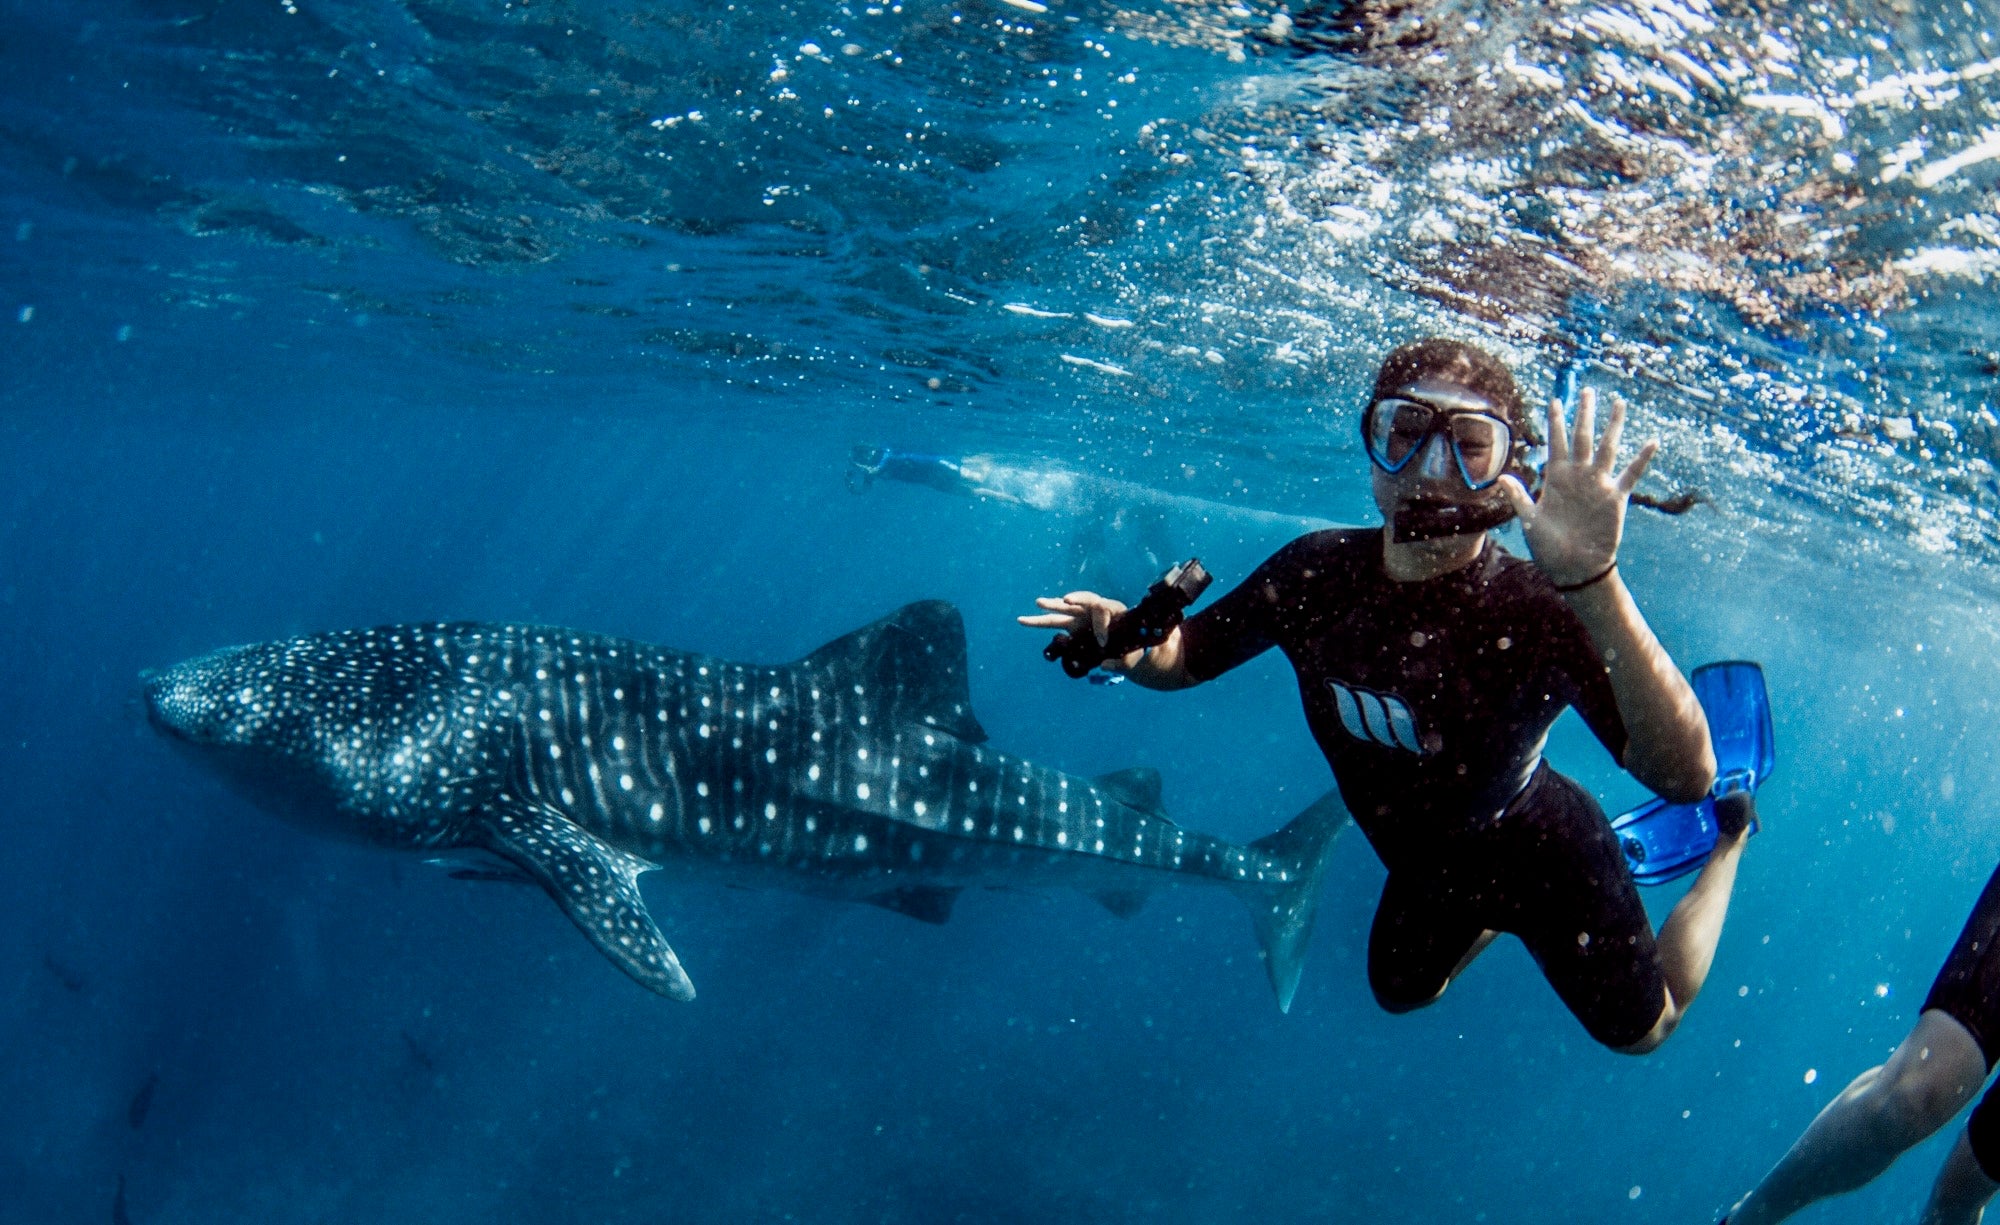 Cyanne snorkeling in the sea with a whale shark.